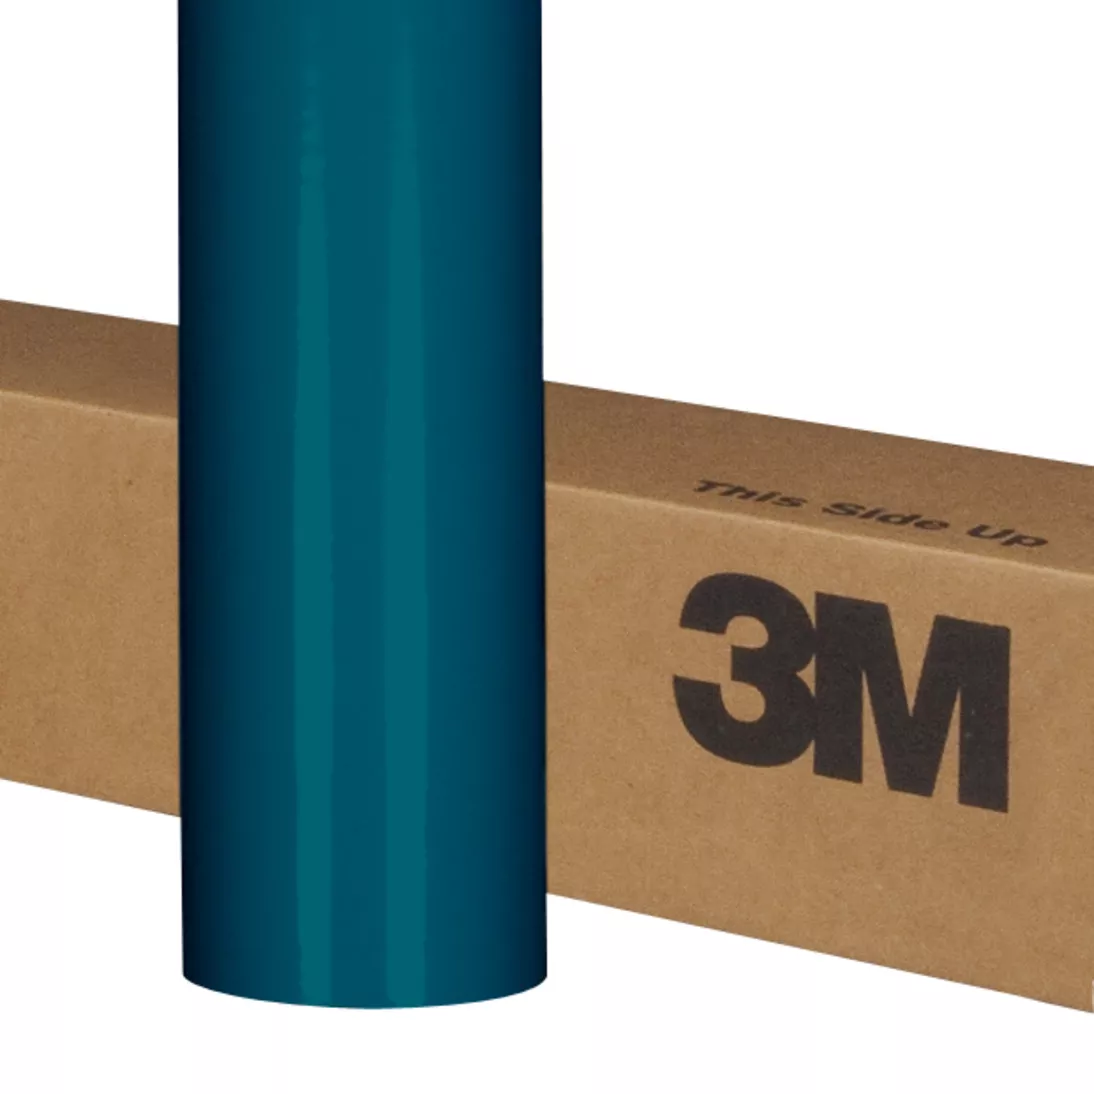 3M™ Scotchcal™ Graphic Film 50-79, Teal Green, 48 in x 50 yd